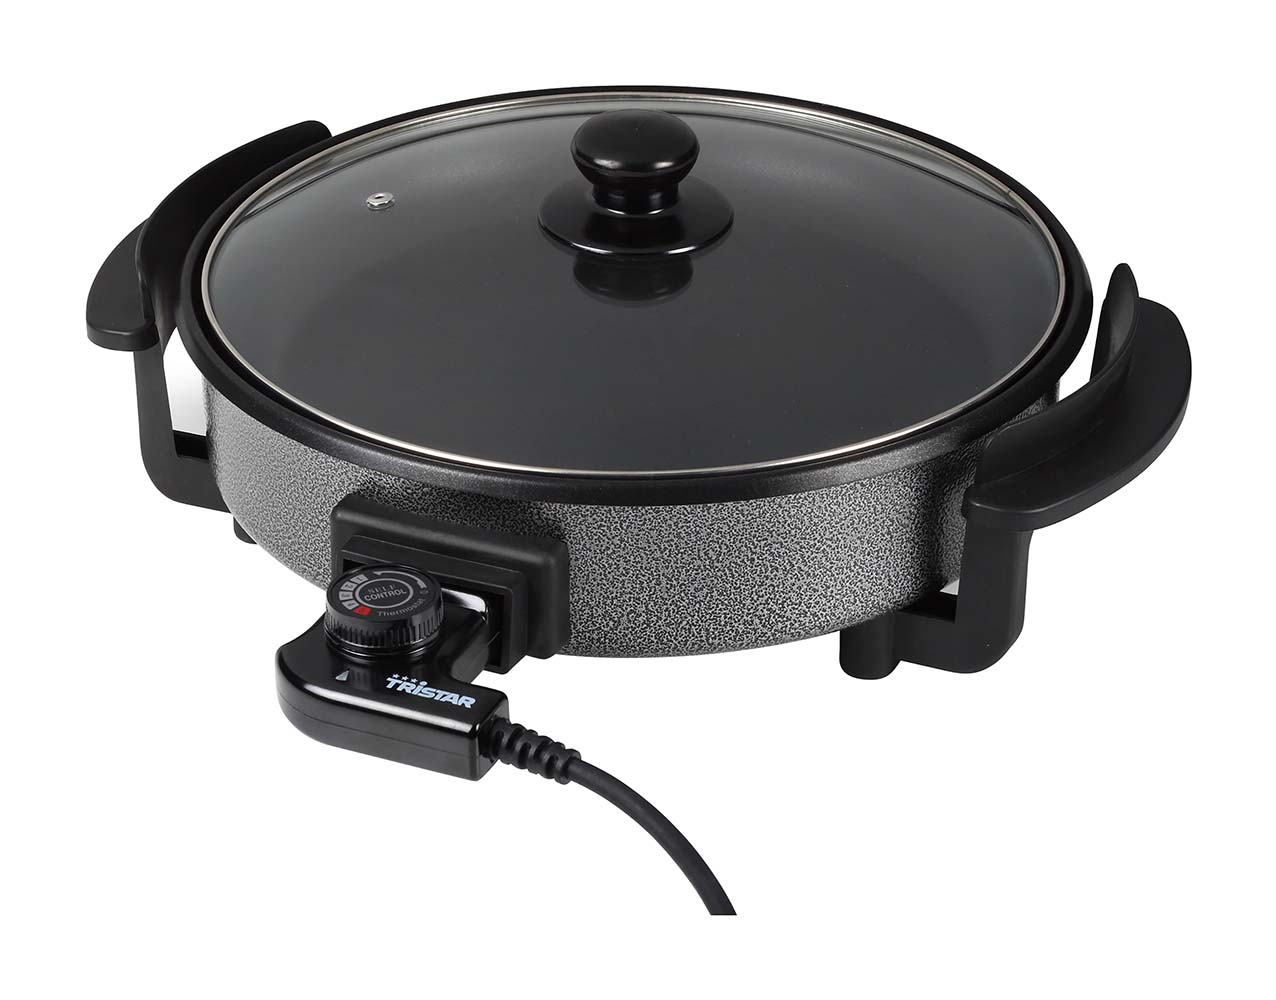 8500650 A large sauté pan. This pan works on electricity and is ideal for baking and frying complete meals. This sauté pan is fitted with a removable and adjustable thermostat. Ideal for travelling and easy to move with the heat-resistant handles. This pan has an output of 1500 watts and operates at 230 volts.